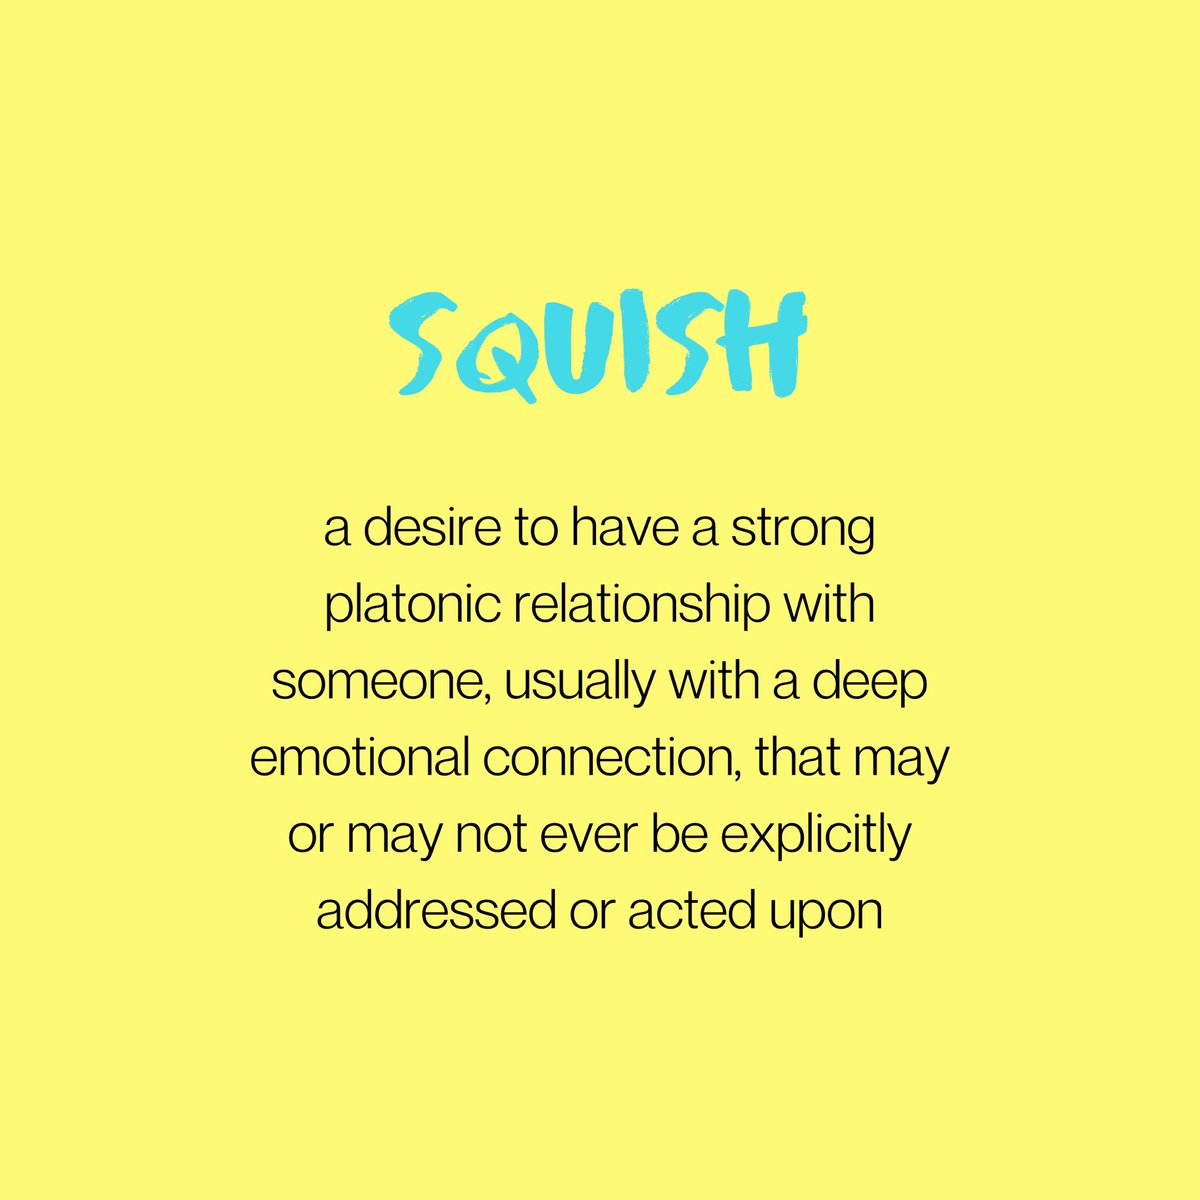 SQUISH: a desire to have a strong platonic relationship with someone, usually with a deep emotional connection. may or may not ever be explicitly addressed or acted upon.